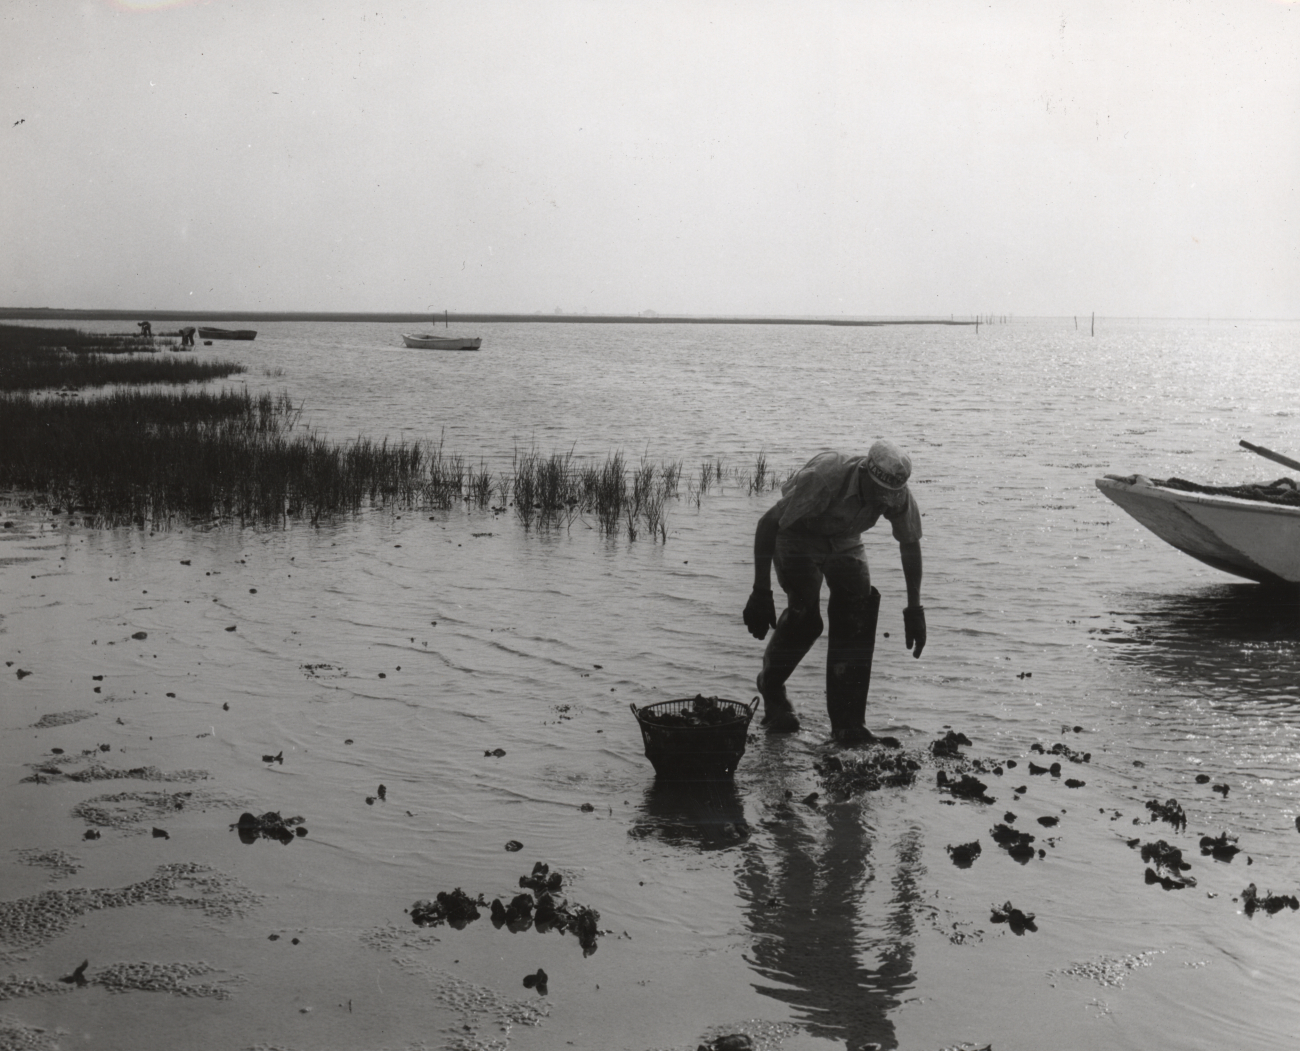 On the shallow mud flats, oyster fishermen collect small oysters which are thenreplanted in areas better suited for fast growth